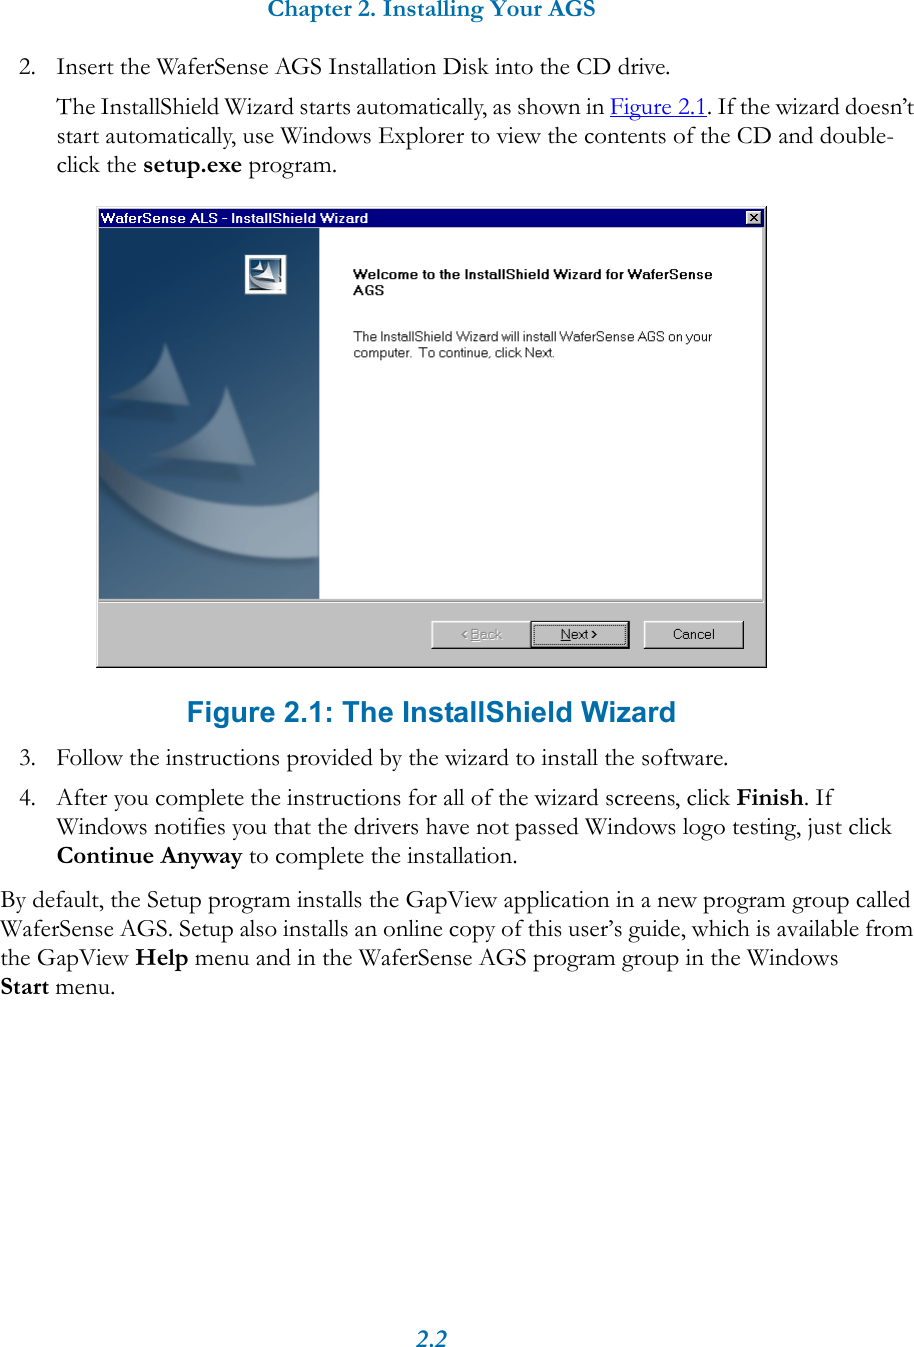 Chapter 2. Installing Your AGS2.22. Insert the WaferSense AGS Installation Disk into the CD drive.The InstallShield Wizard starts automatically, as shown in Figure 2.1. If the wizard doesn’t start automatically, use Windows Explorer to view the contents of the CD and double-click the setup.exe program. Figure 2.1: The InstallShield Wizard3. Follow the instructions provided by the wizard to install the software.4. After you complete the instructions for all of the wizard screens, click Finish. If Windows notifies you that the drivers have not passed Windows logo testing, just click Continue Anyway to complete the installation.By default, the Setup program installs the GapView application in a new program group called WaferSense AGS. Setup also installs an online copy of this user’s guide, which is available from the GapView Help menu and in the WaferSense AGS program group in the Windows Start menu.